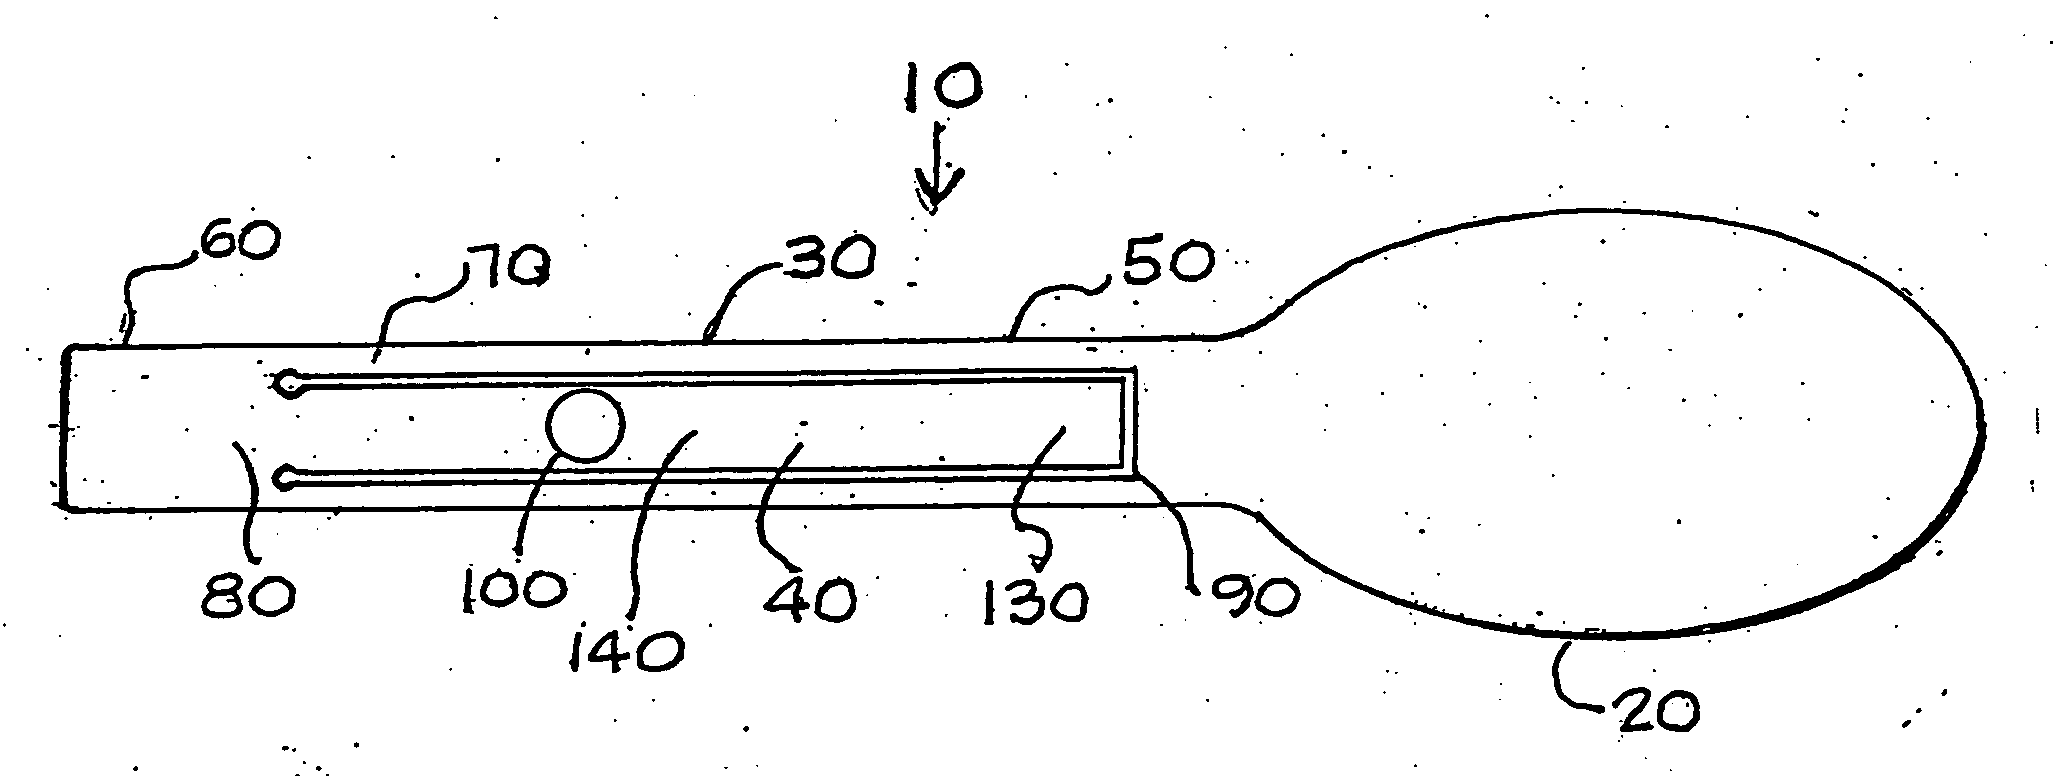 Clip-on utensils and methods of use thereof